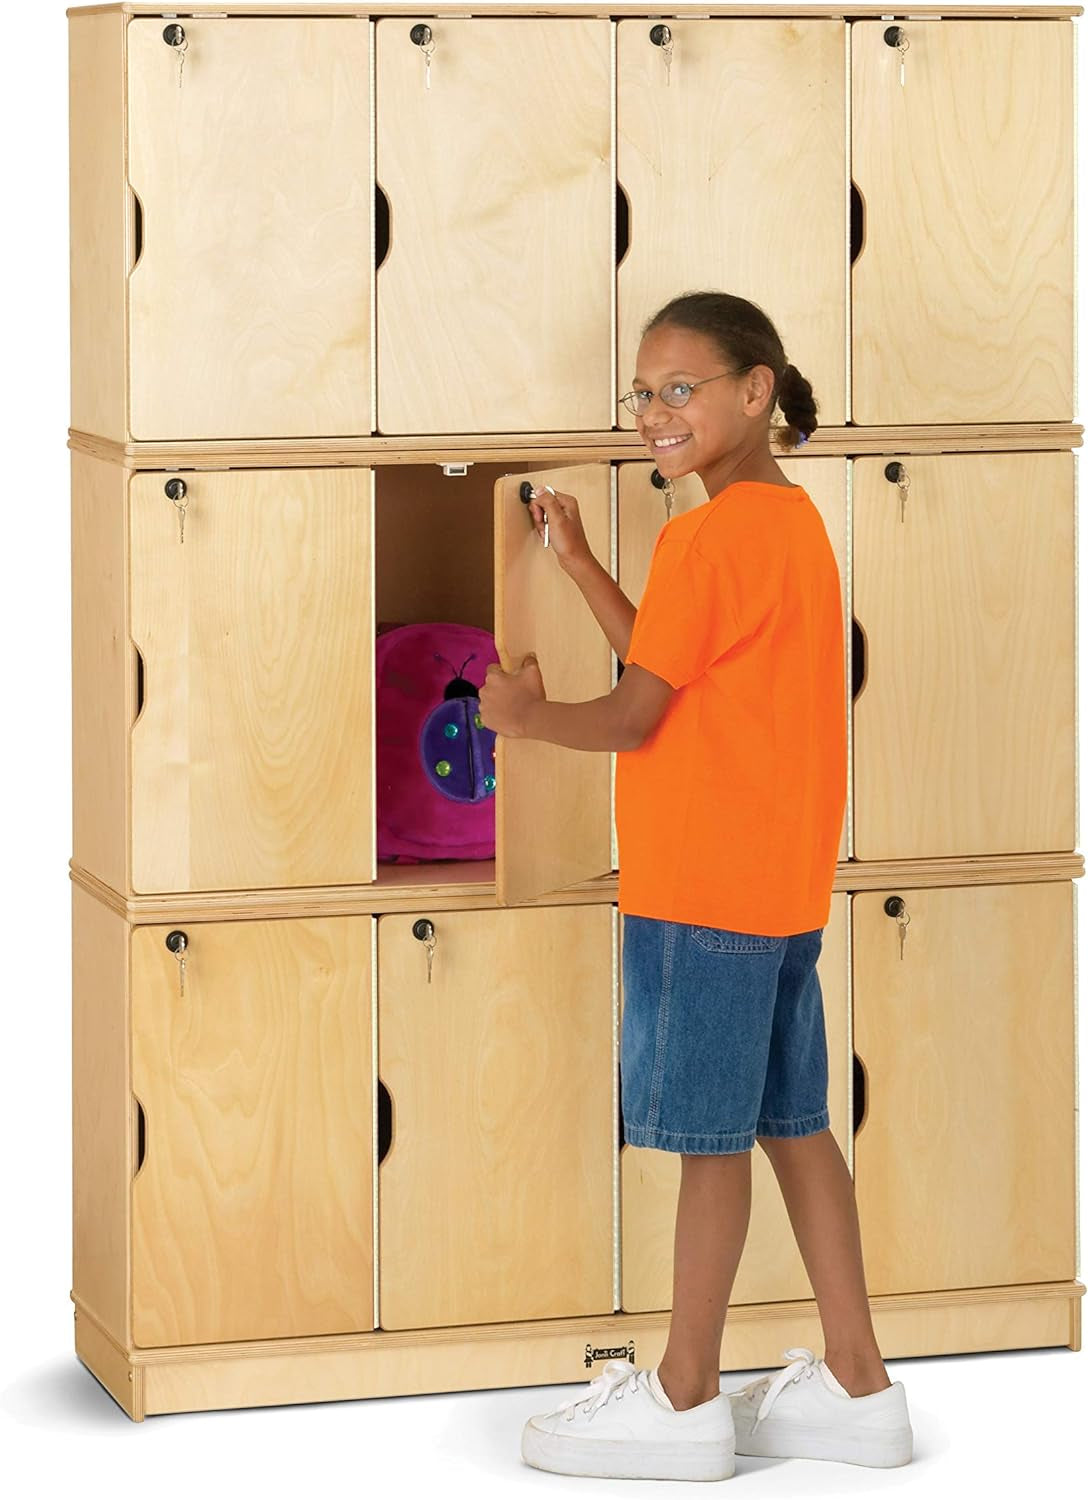 Stacking Lockable Lockers, Double Stack